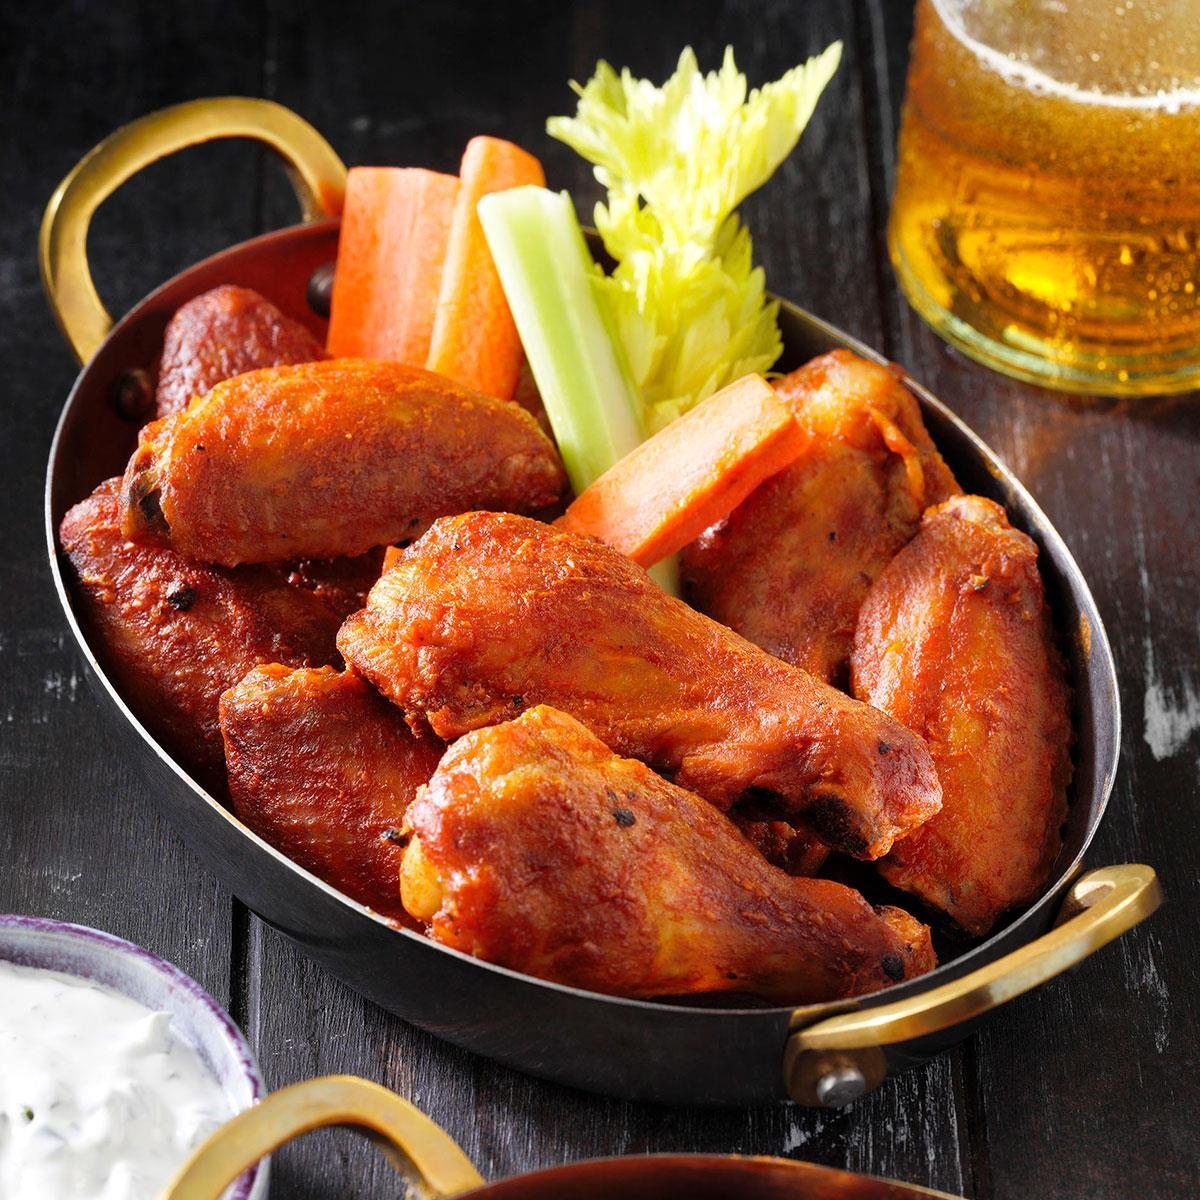 Smoked Chicken Wings Exps Tohfm25 275768 P2 Md 02 13 8b